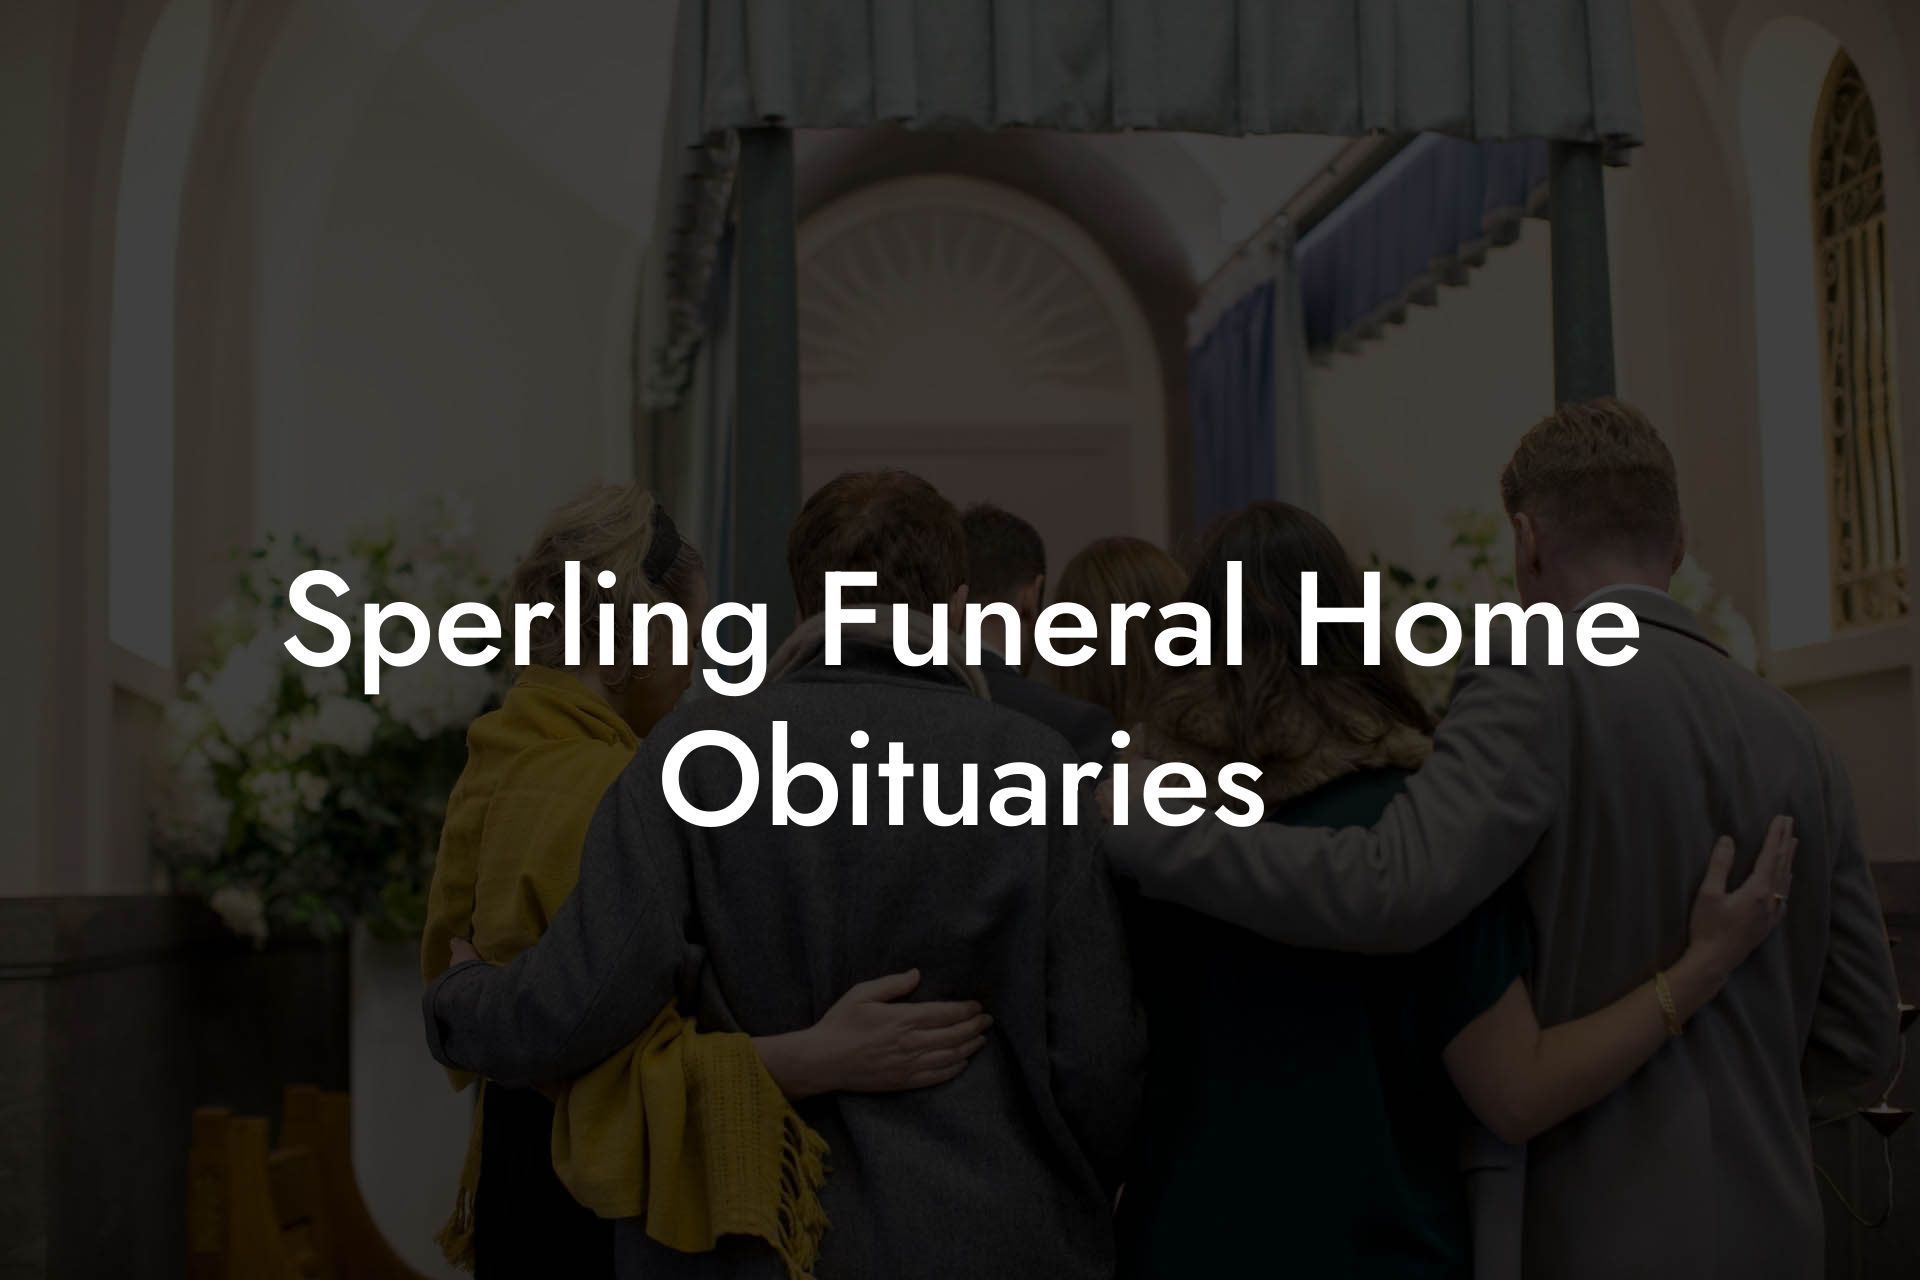 Sperling Funeral Home Obituaries